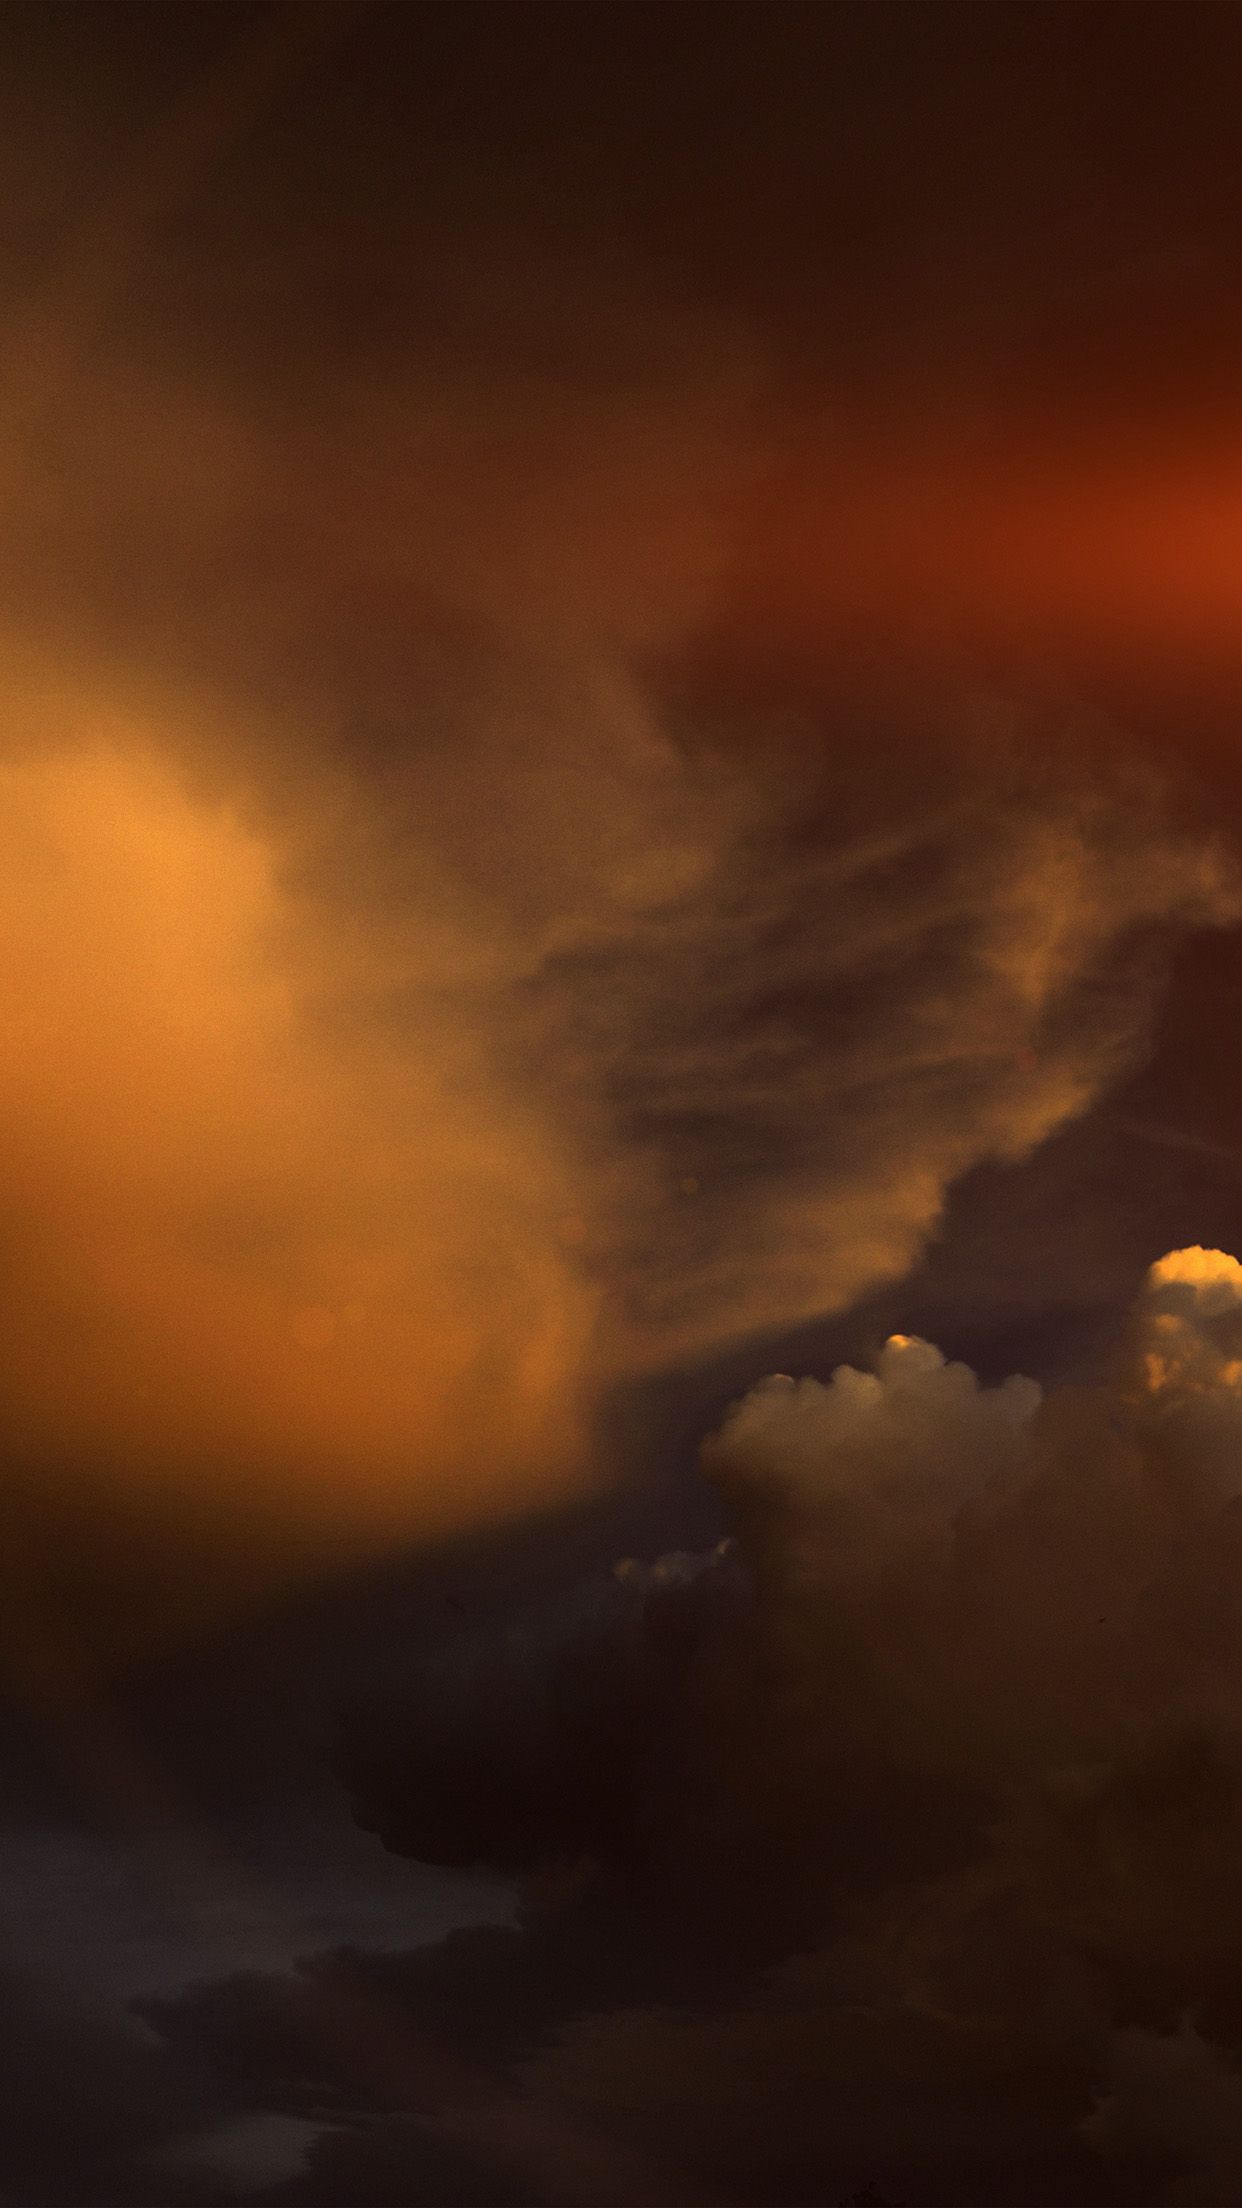 A dark and moody photo of clouds with a hint of orange in the sky. - Light brown, warm, sky, cloud